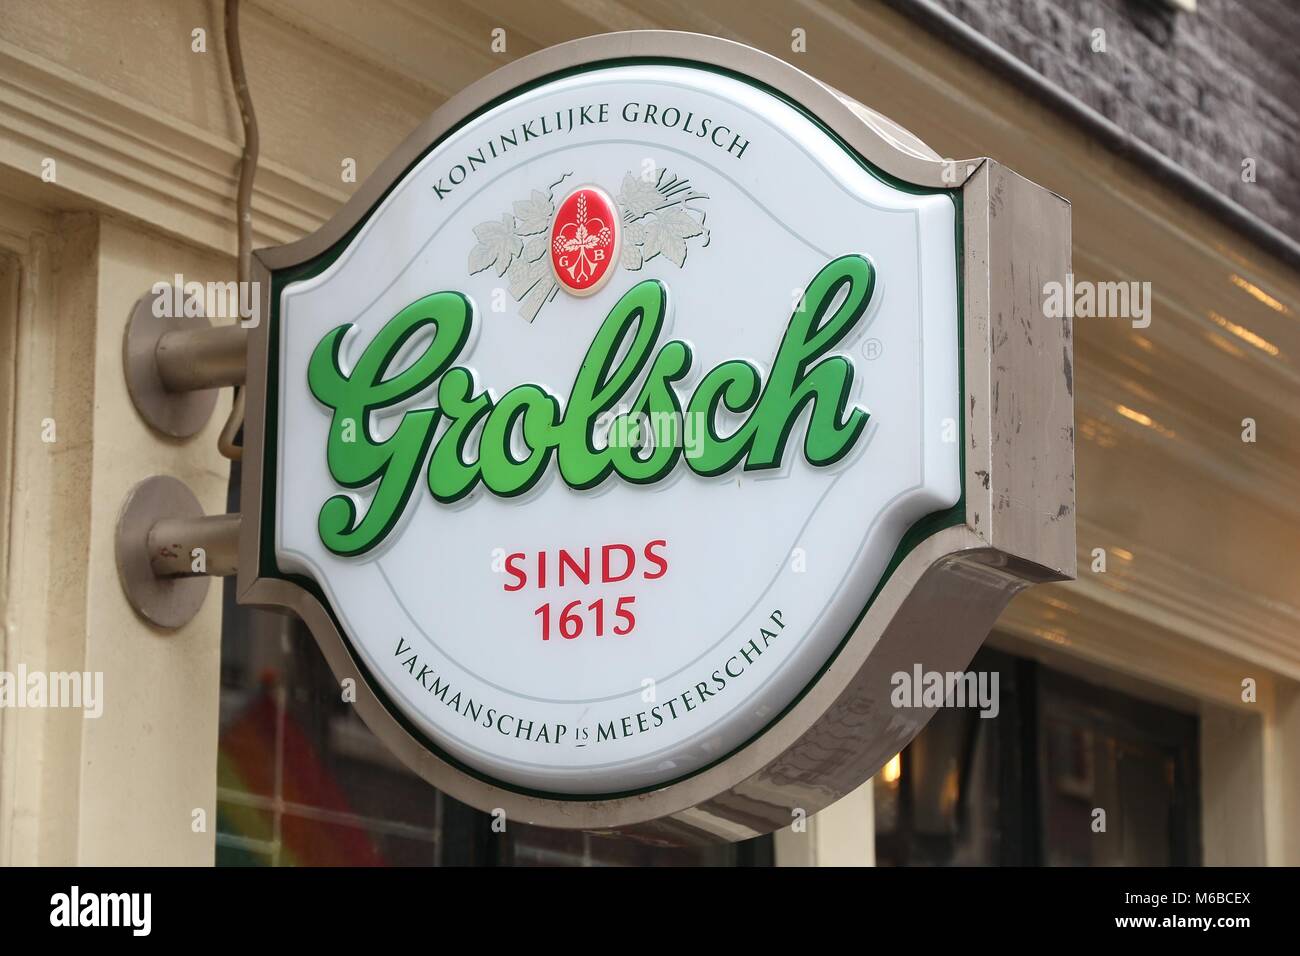 AMSTERDAM, NETHERLANDS - JULY 8, 2017: Grolsch beer sign in Amsterdam, Netherlands. Grolsch is a Dutch brewery founded in 1615. Stock Photo